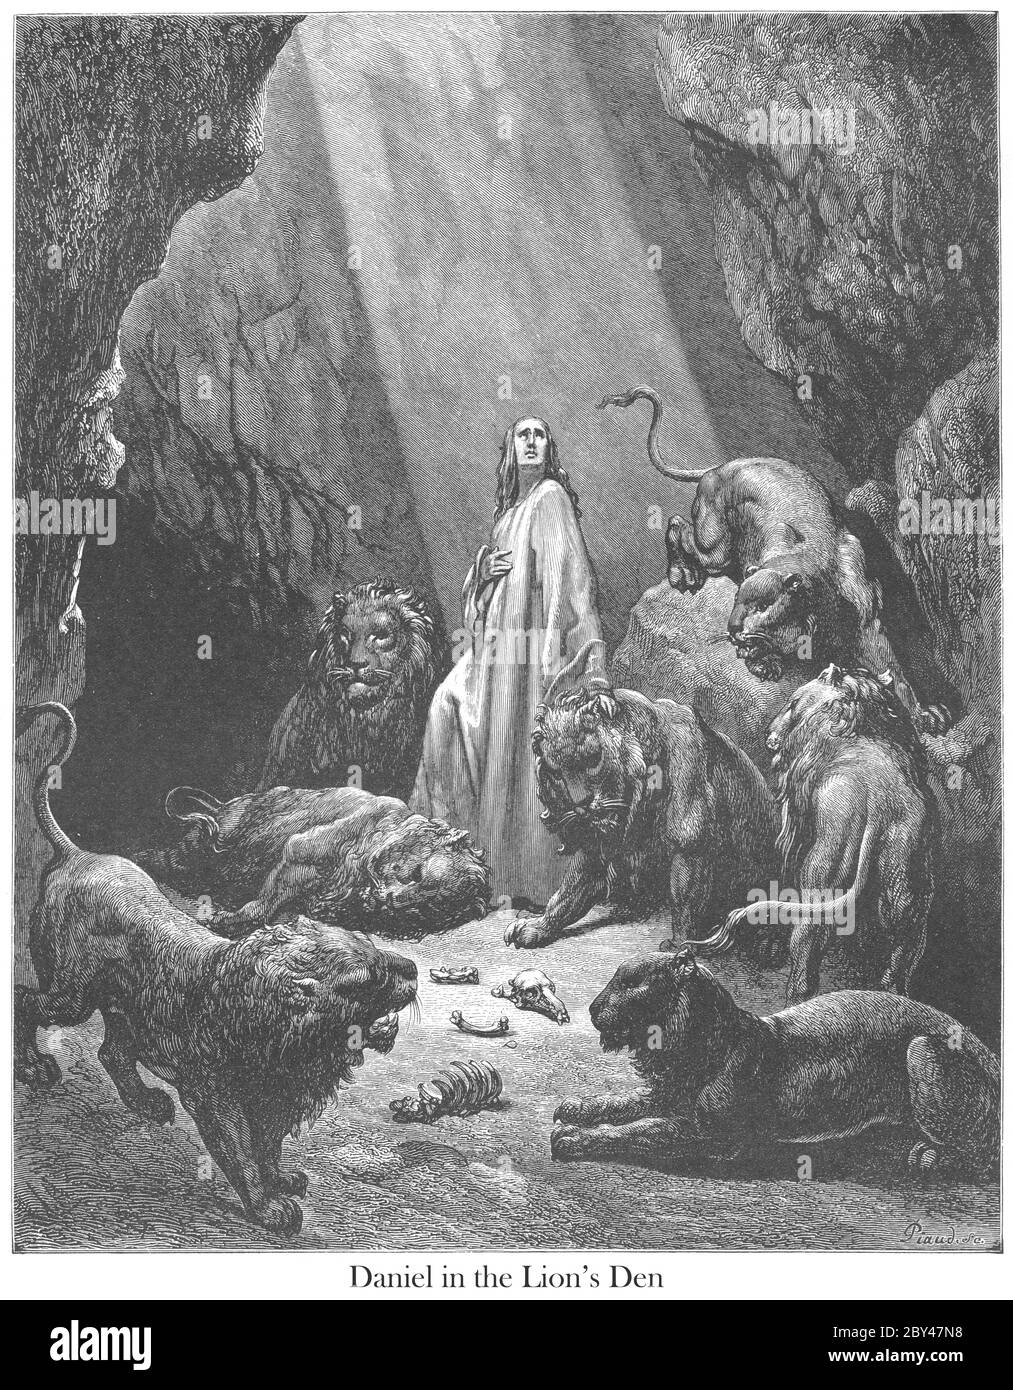 Daniel in the Den of Lions Daniel 6:20-21 From the book 'Bible Gallery' Illustrated by Gustave Dore with Memoir of Dore and Descriptive Letter-press by Talbot W. Chambers D.D. Published by Cassell & Company Limited in London and simultaneously by Mame in Tours, France in 1866 Stock Photo